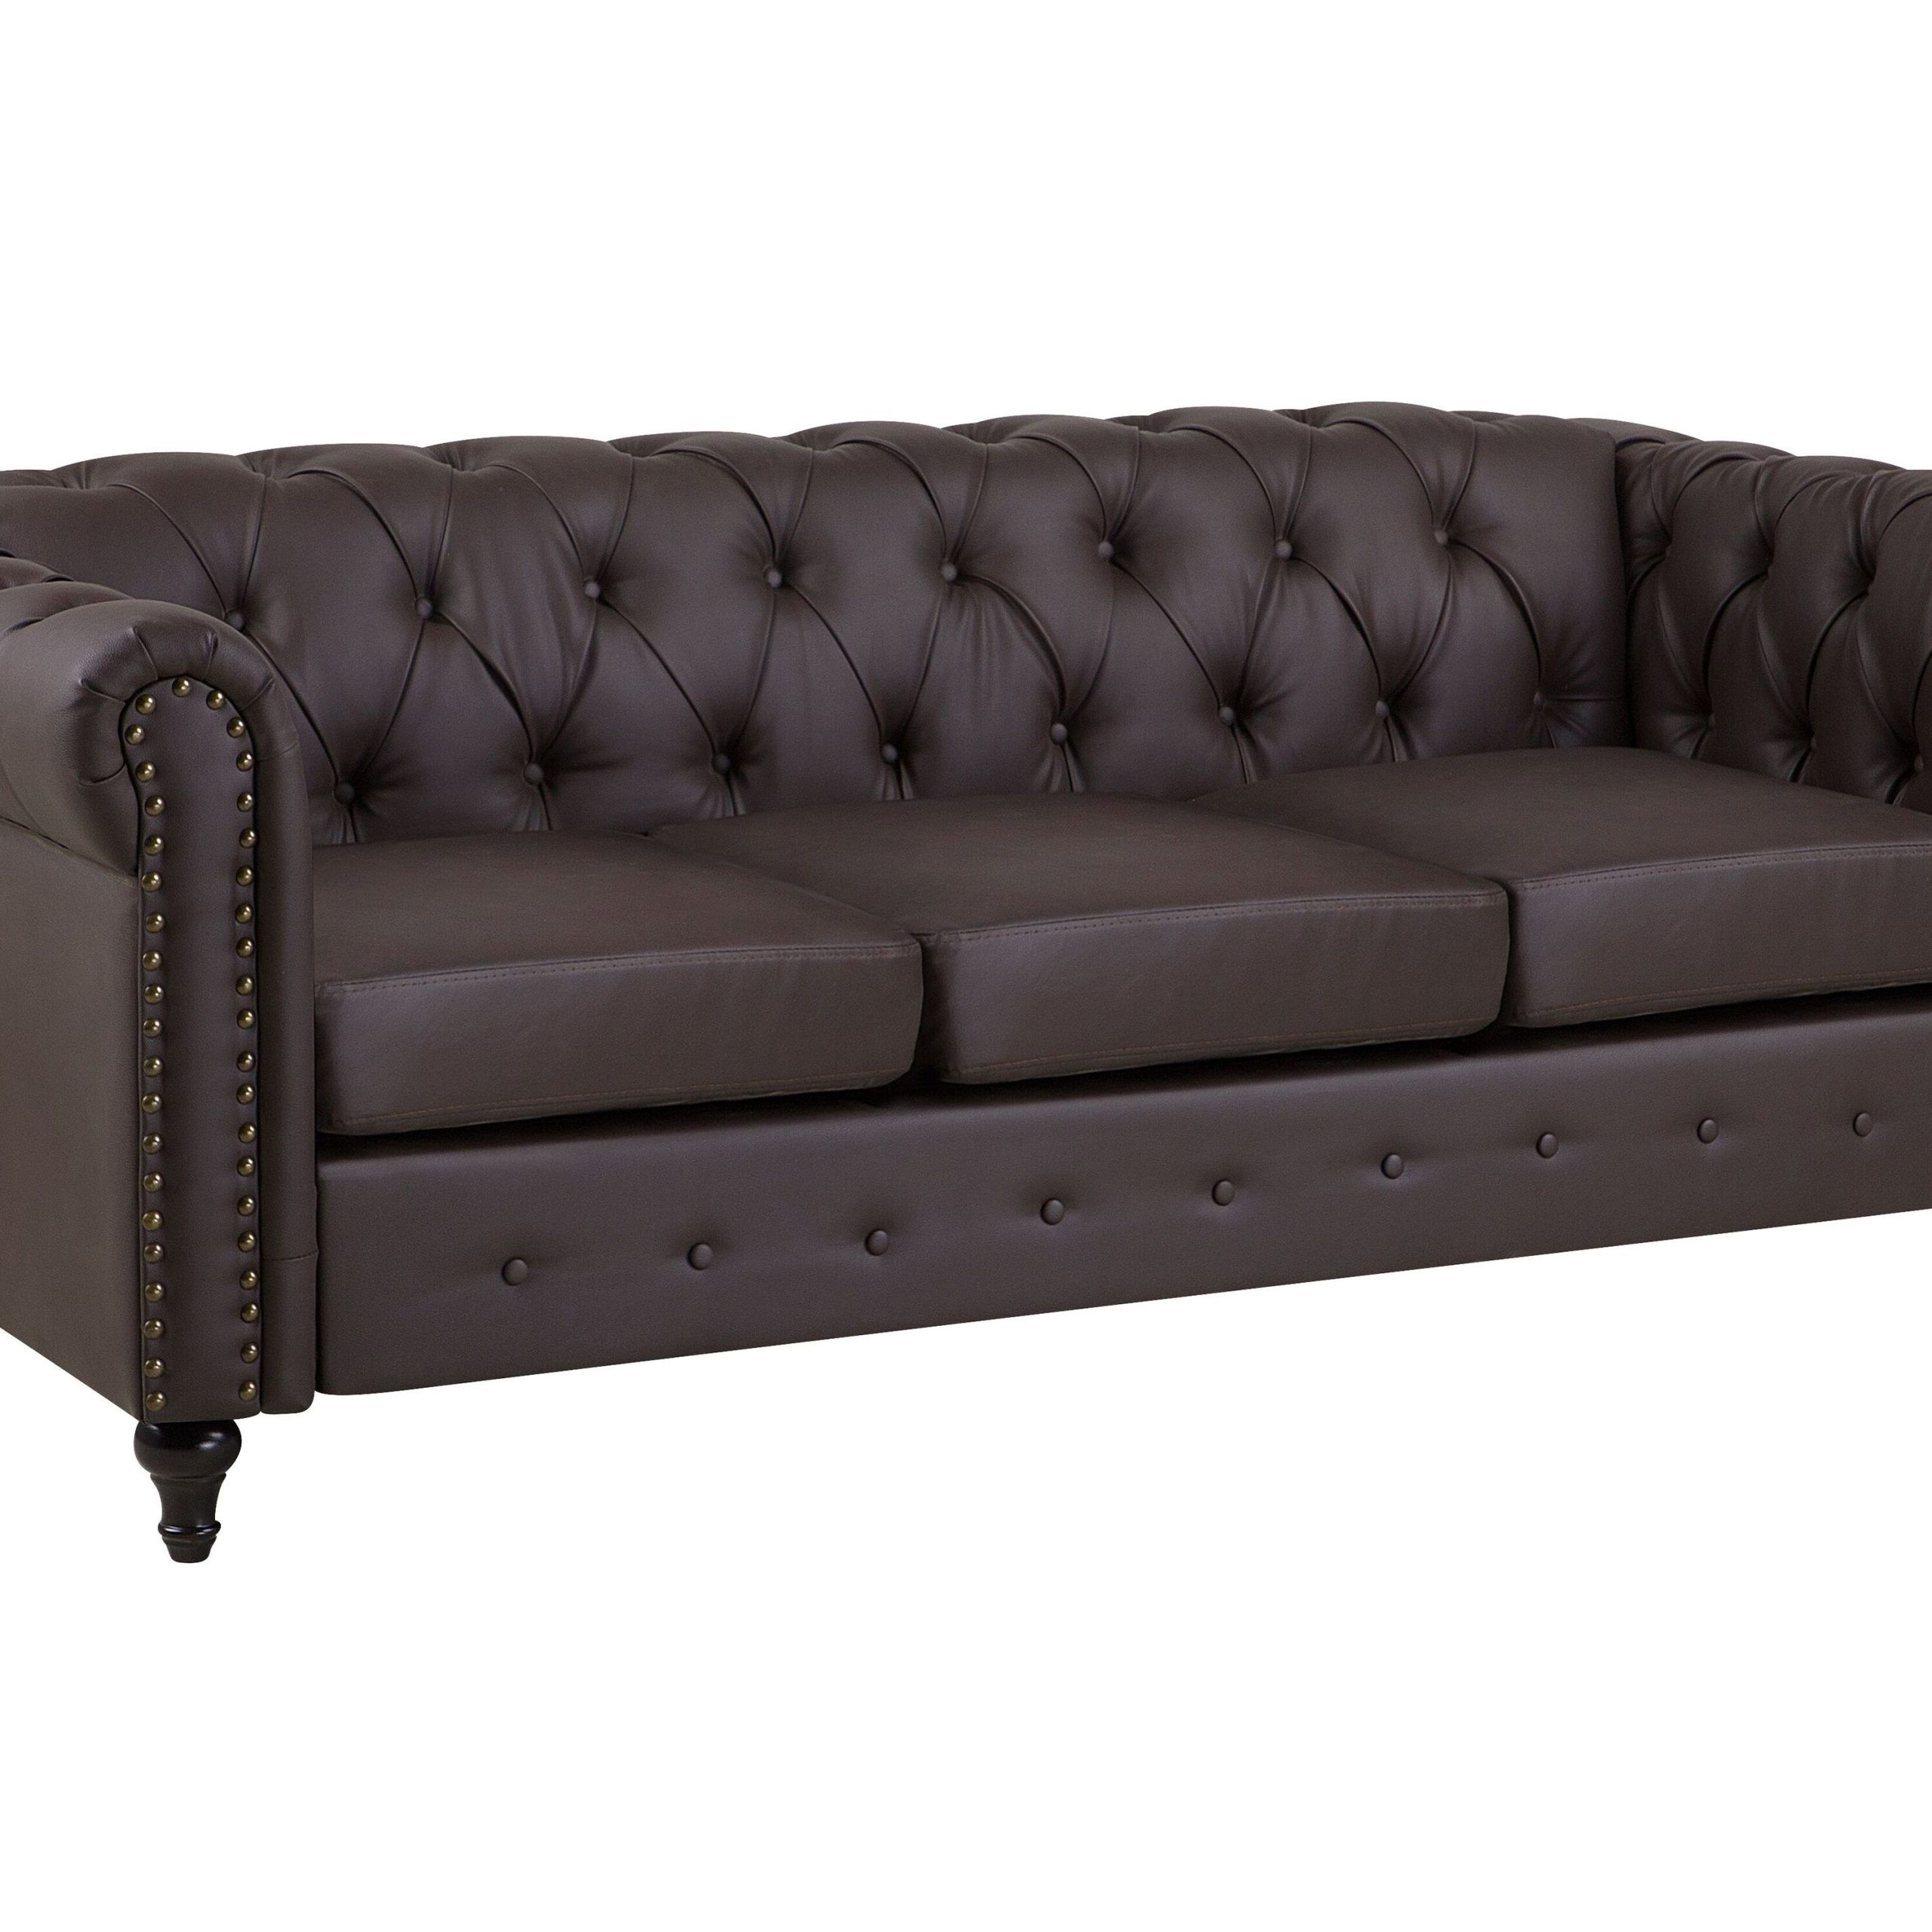 3 Seater Faux Leather Sofa Brown Chesterfield | Beliani.co (View 10 of 20)